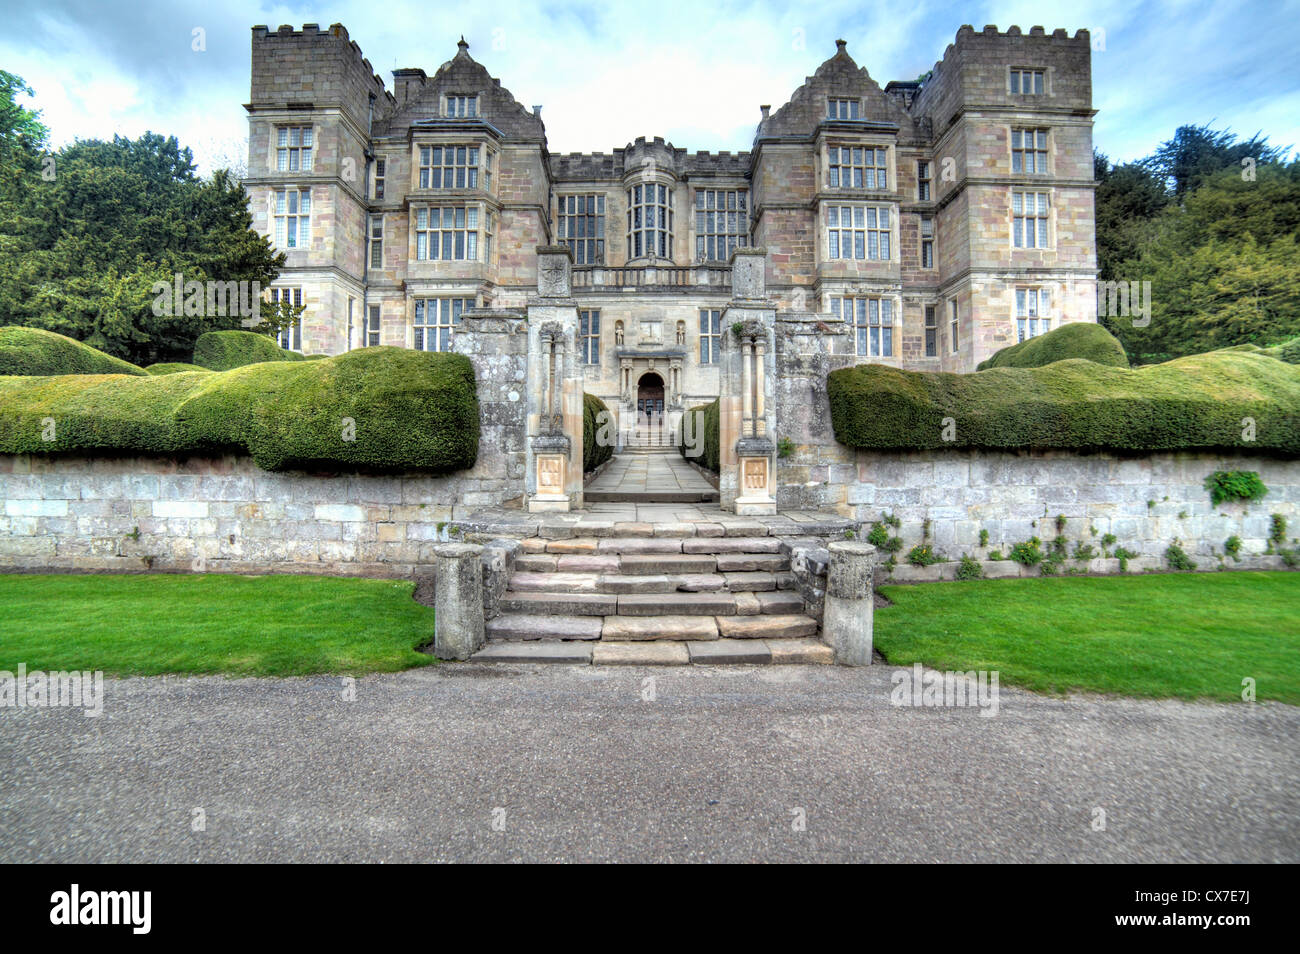 Fountains Hall (1604), Studley Royal Park, North Yorkshire, Inghilterra, Regno Unito Foto Stock